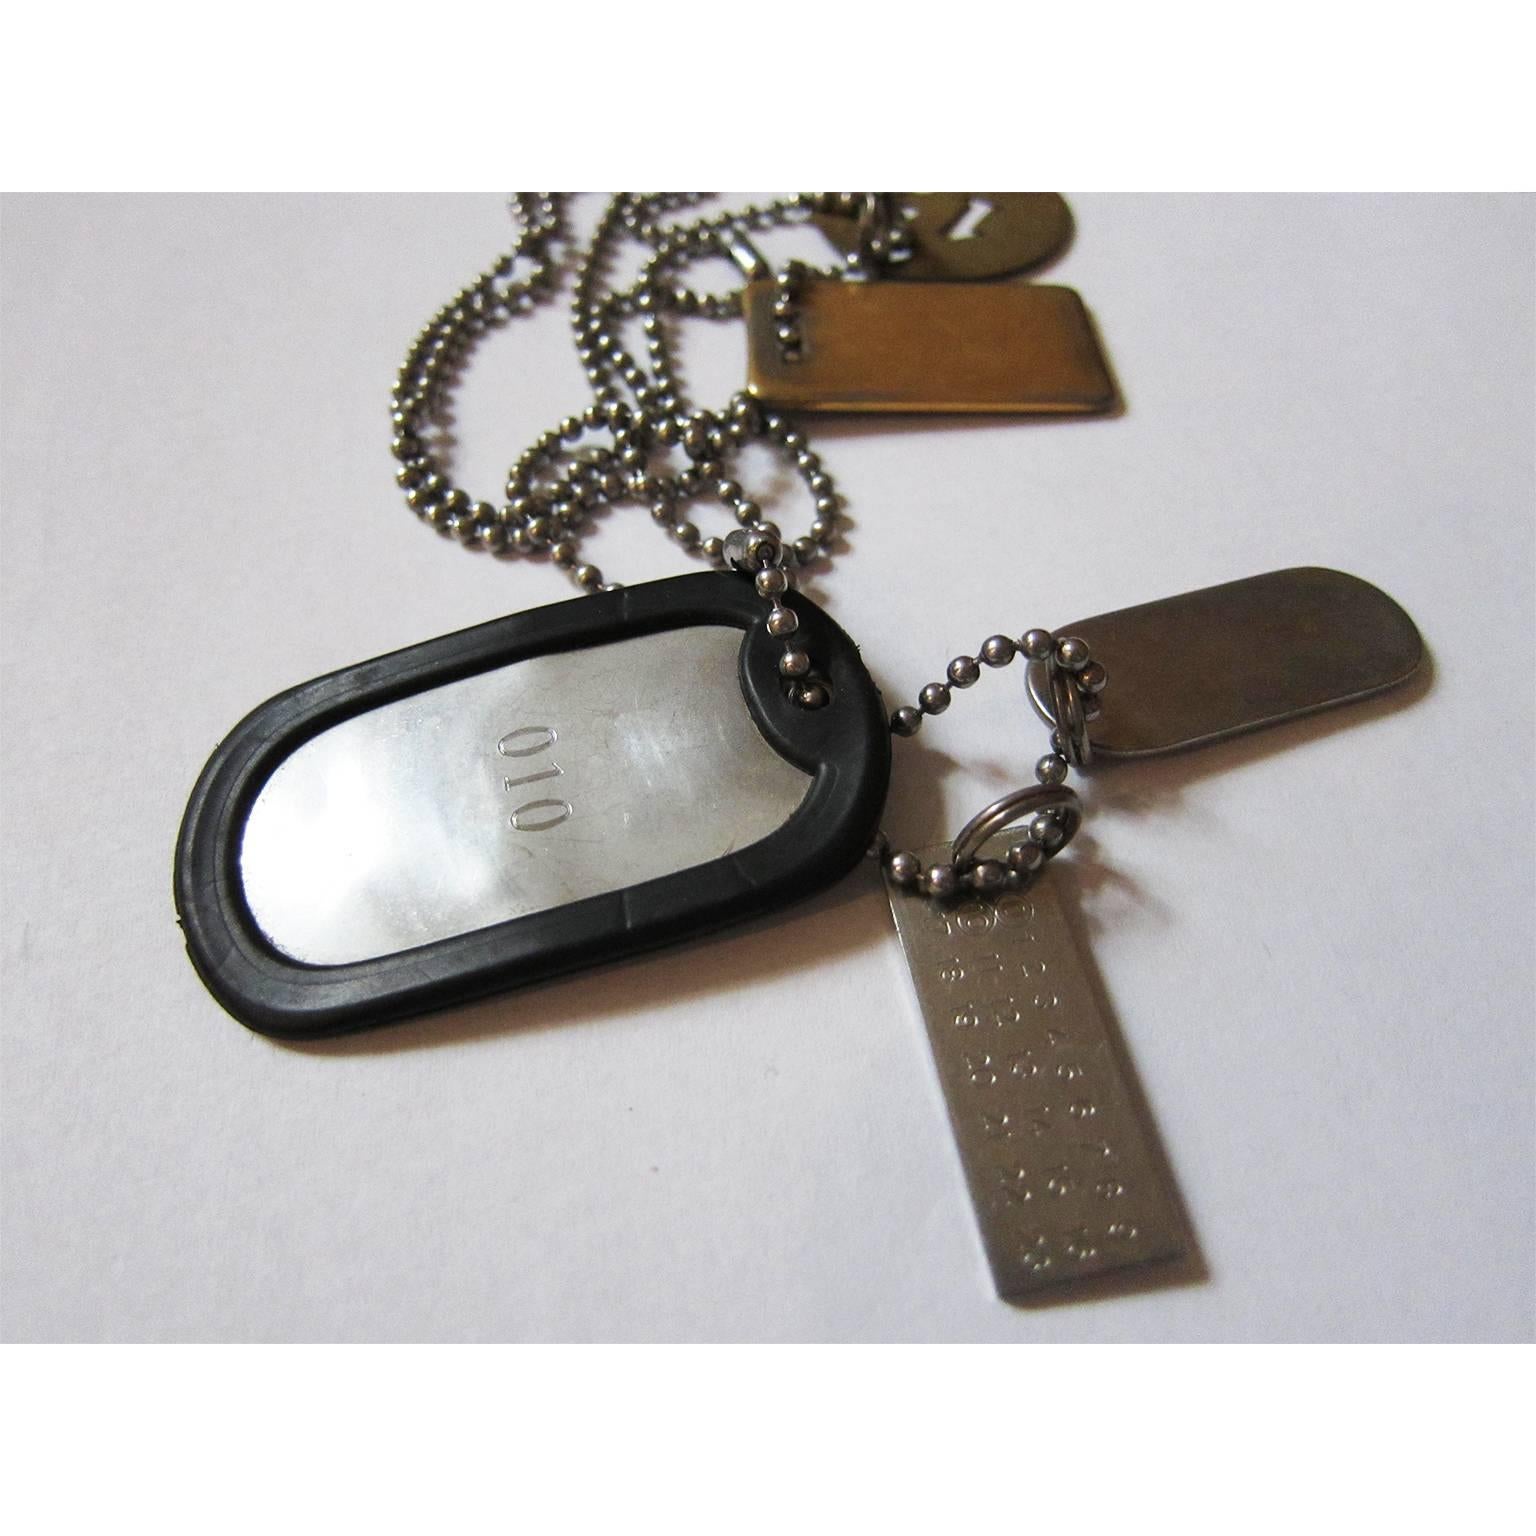 Martin Margiela artisanal dog tag chain necklace from circa 1994. 
One size.